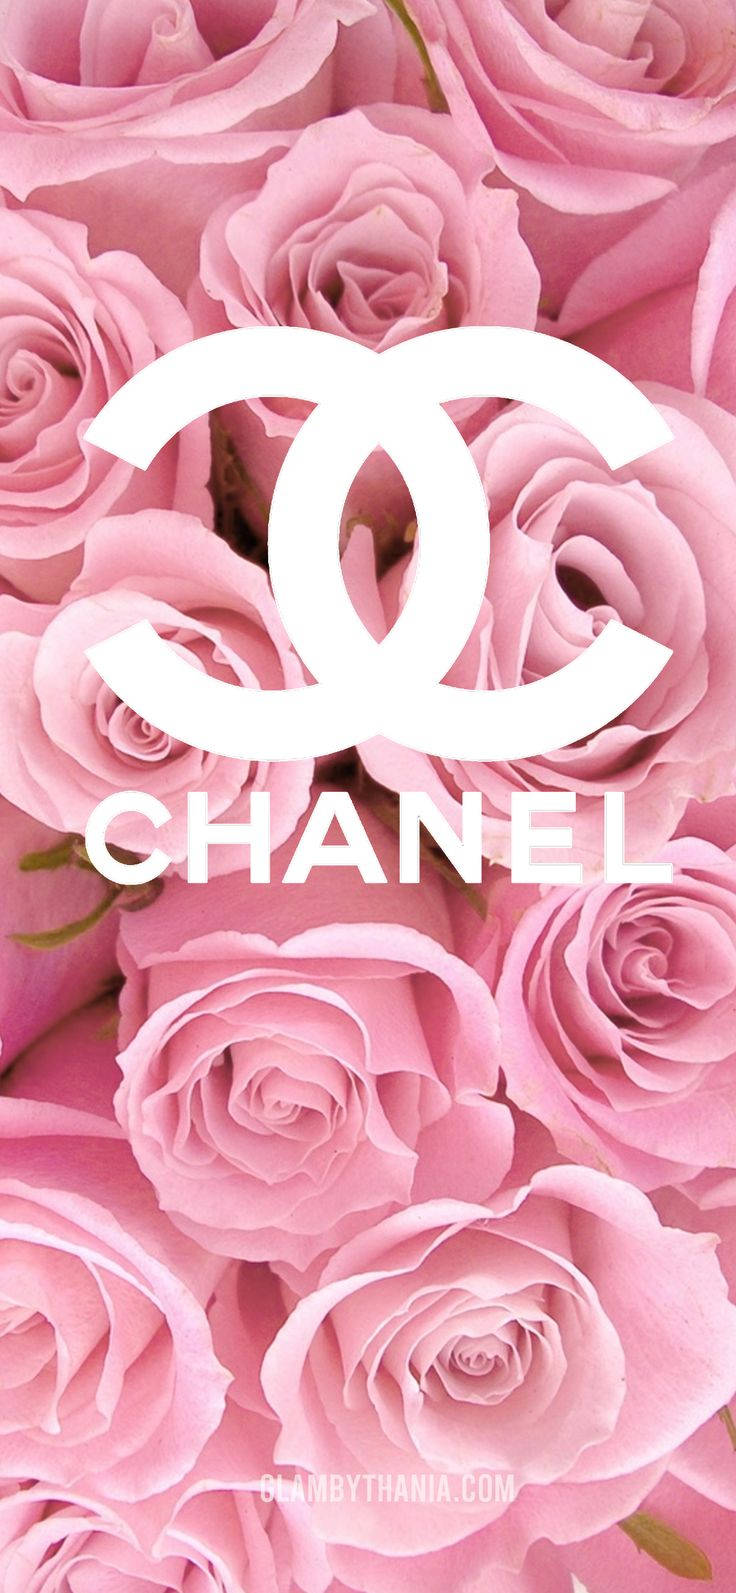 Chanel Roses Girly Iphone